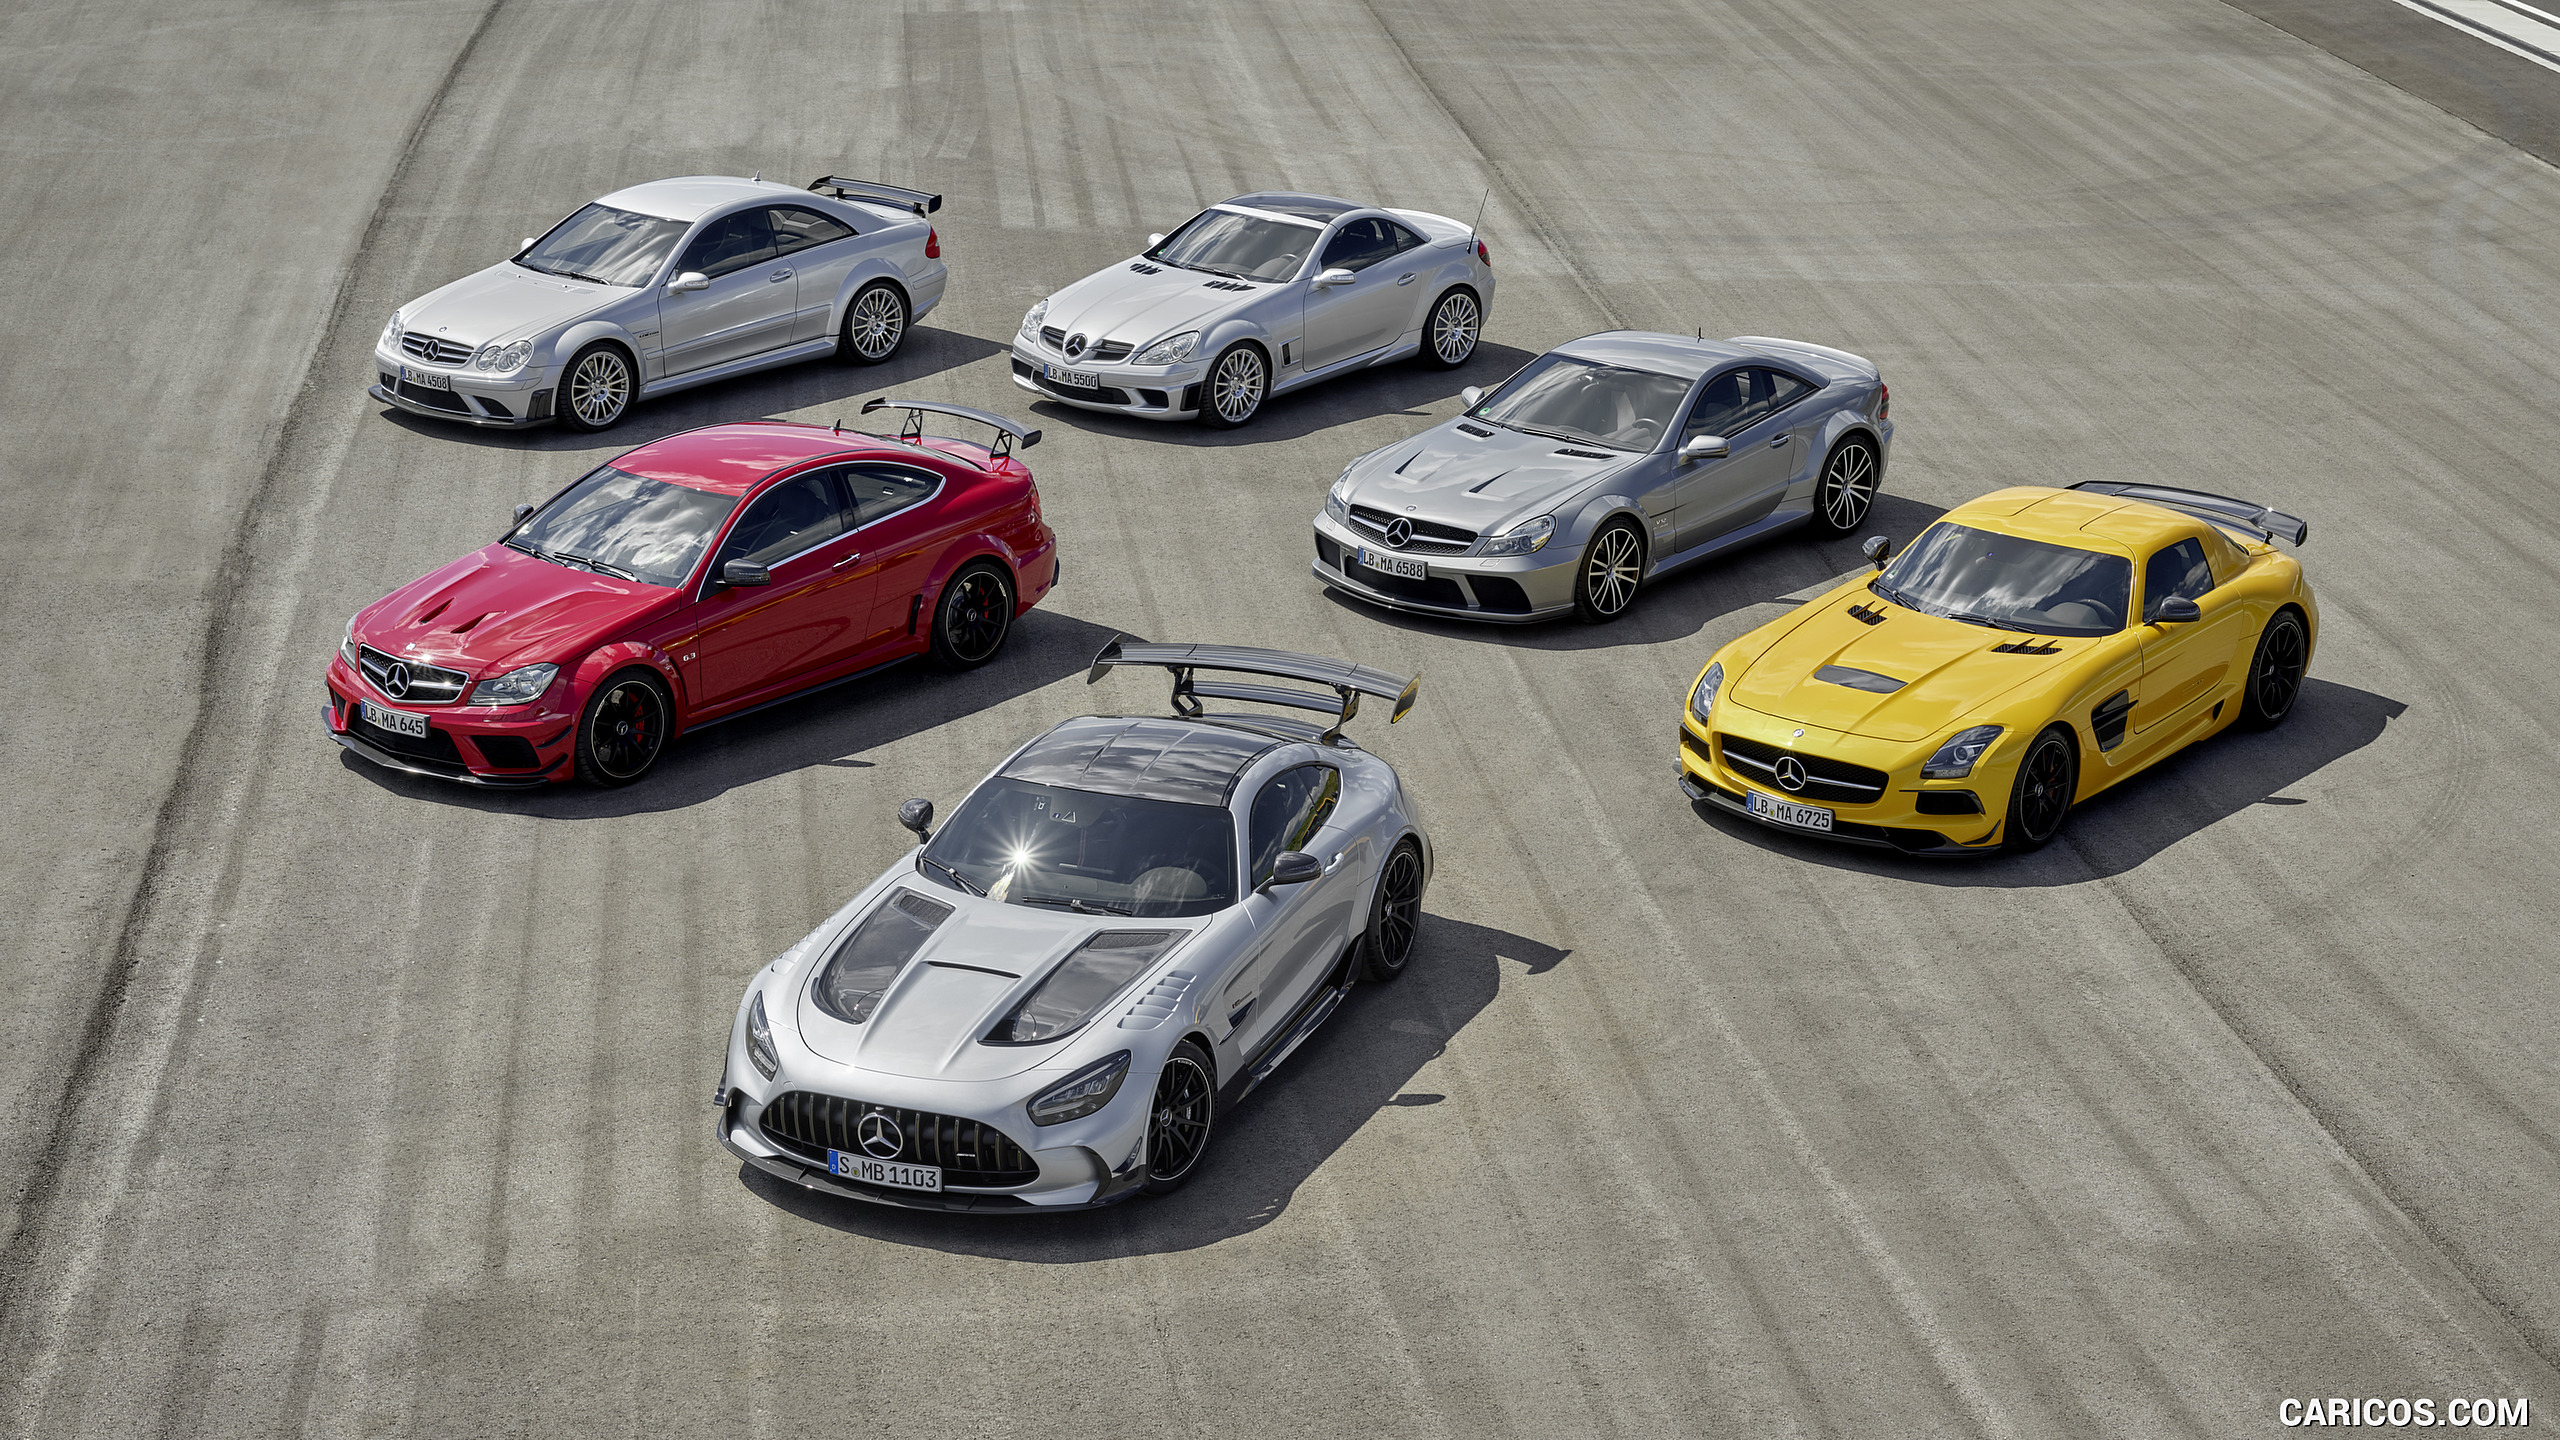 2021 Mercedes-AMG GT Black Series and Previous AMG Black Series Models, #104 of 215